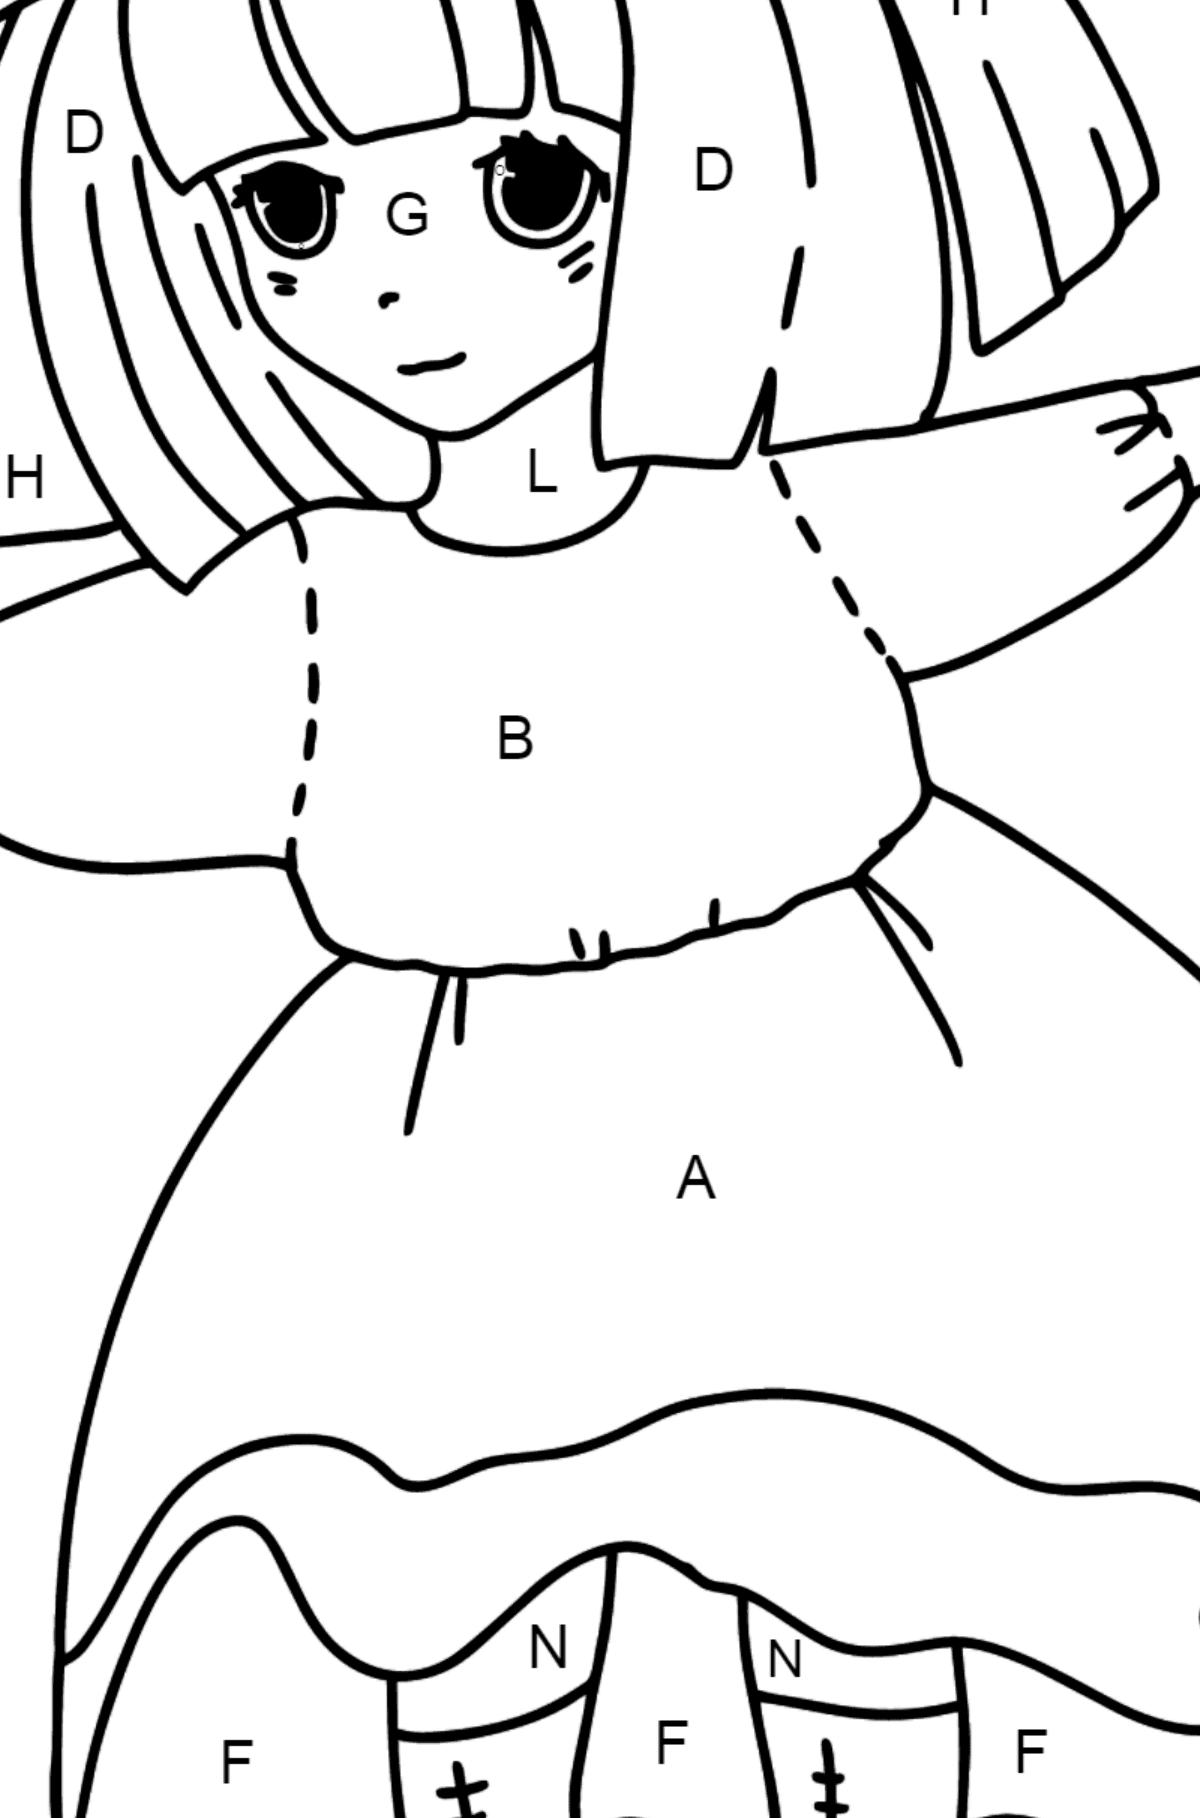 Anime Girl Dancing coloring page - Coloring by Letters for Kids